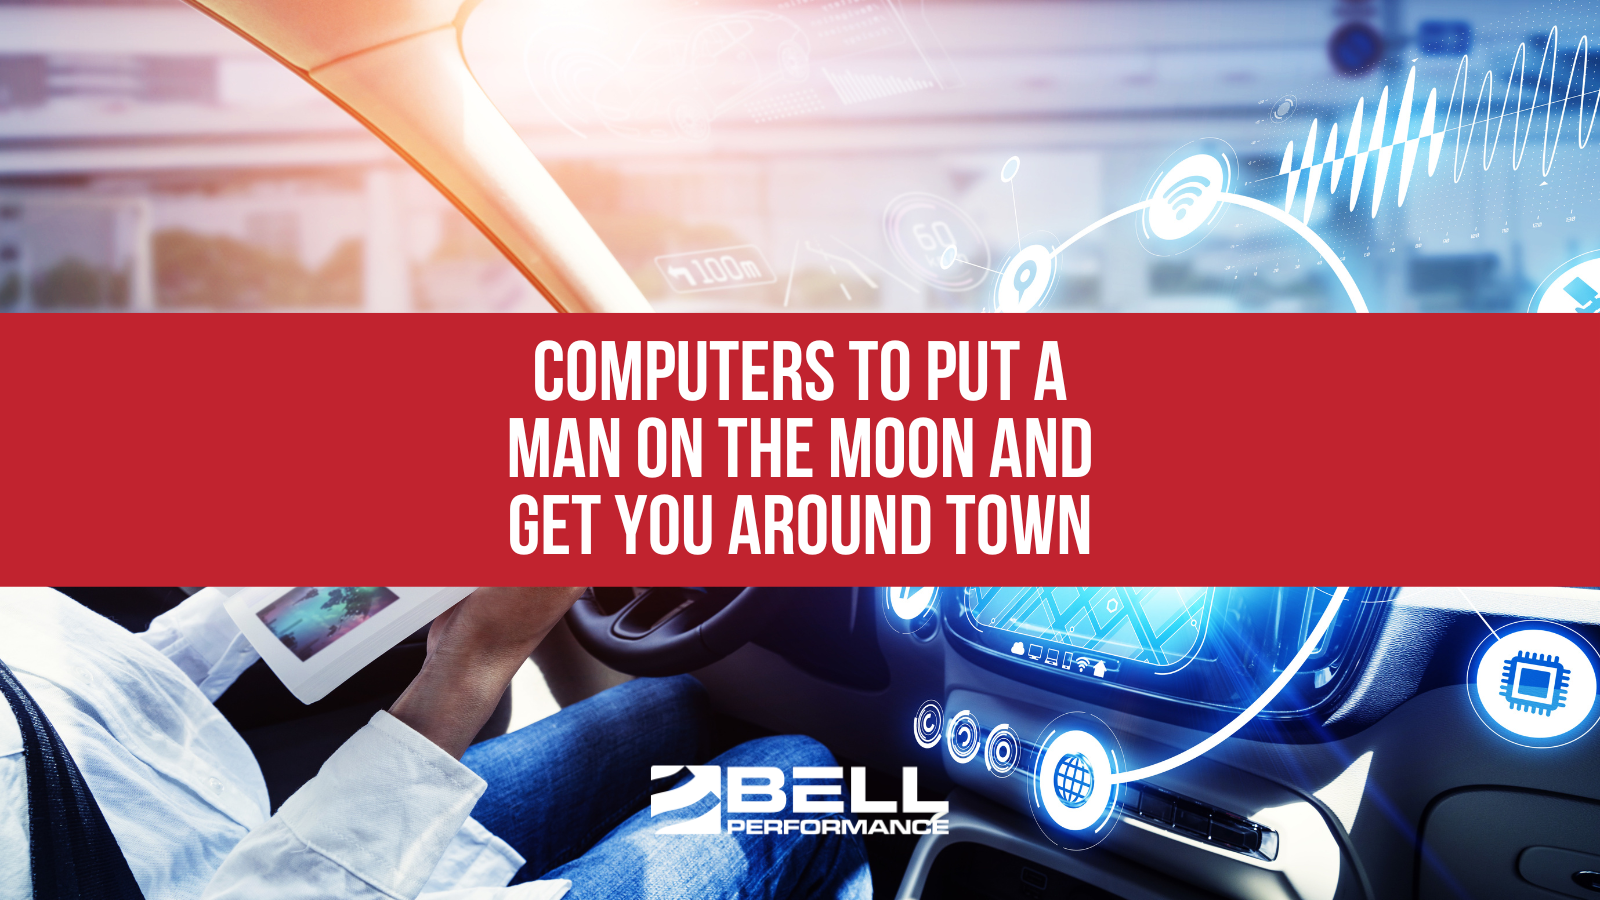 Computers to put a man on the moon and get you around town